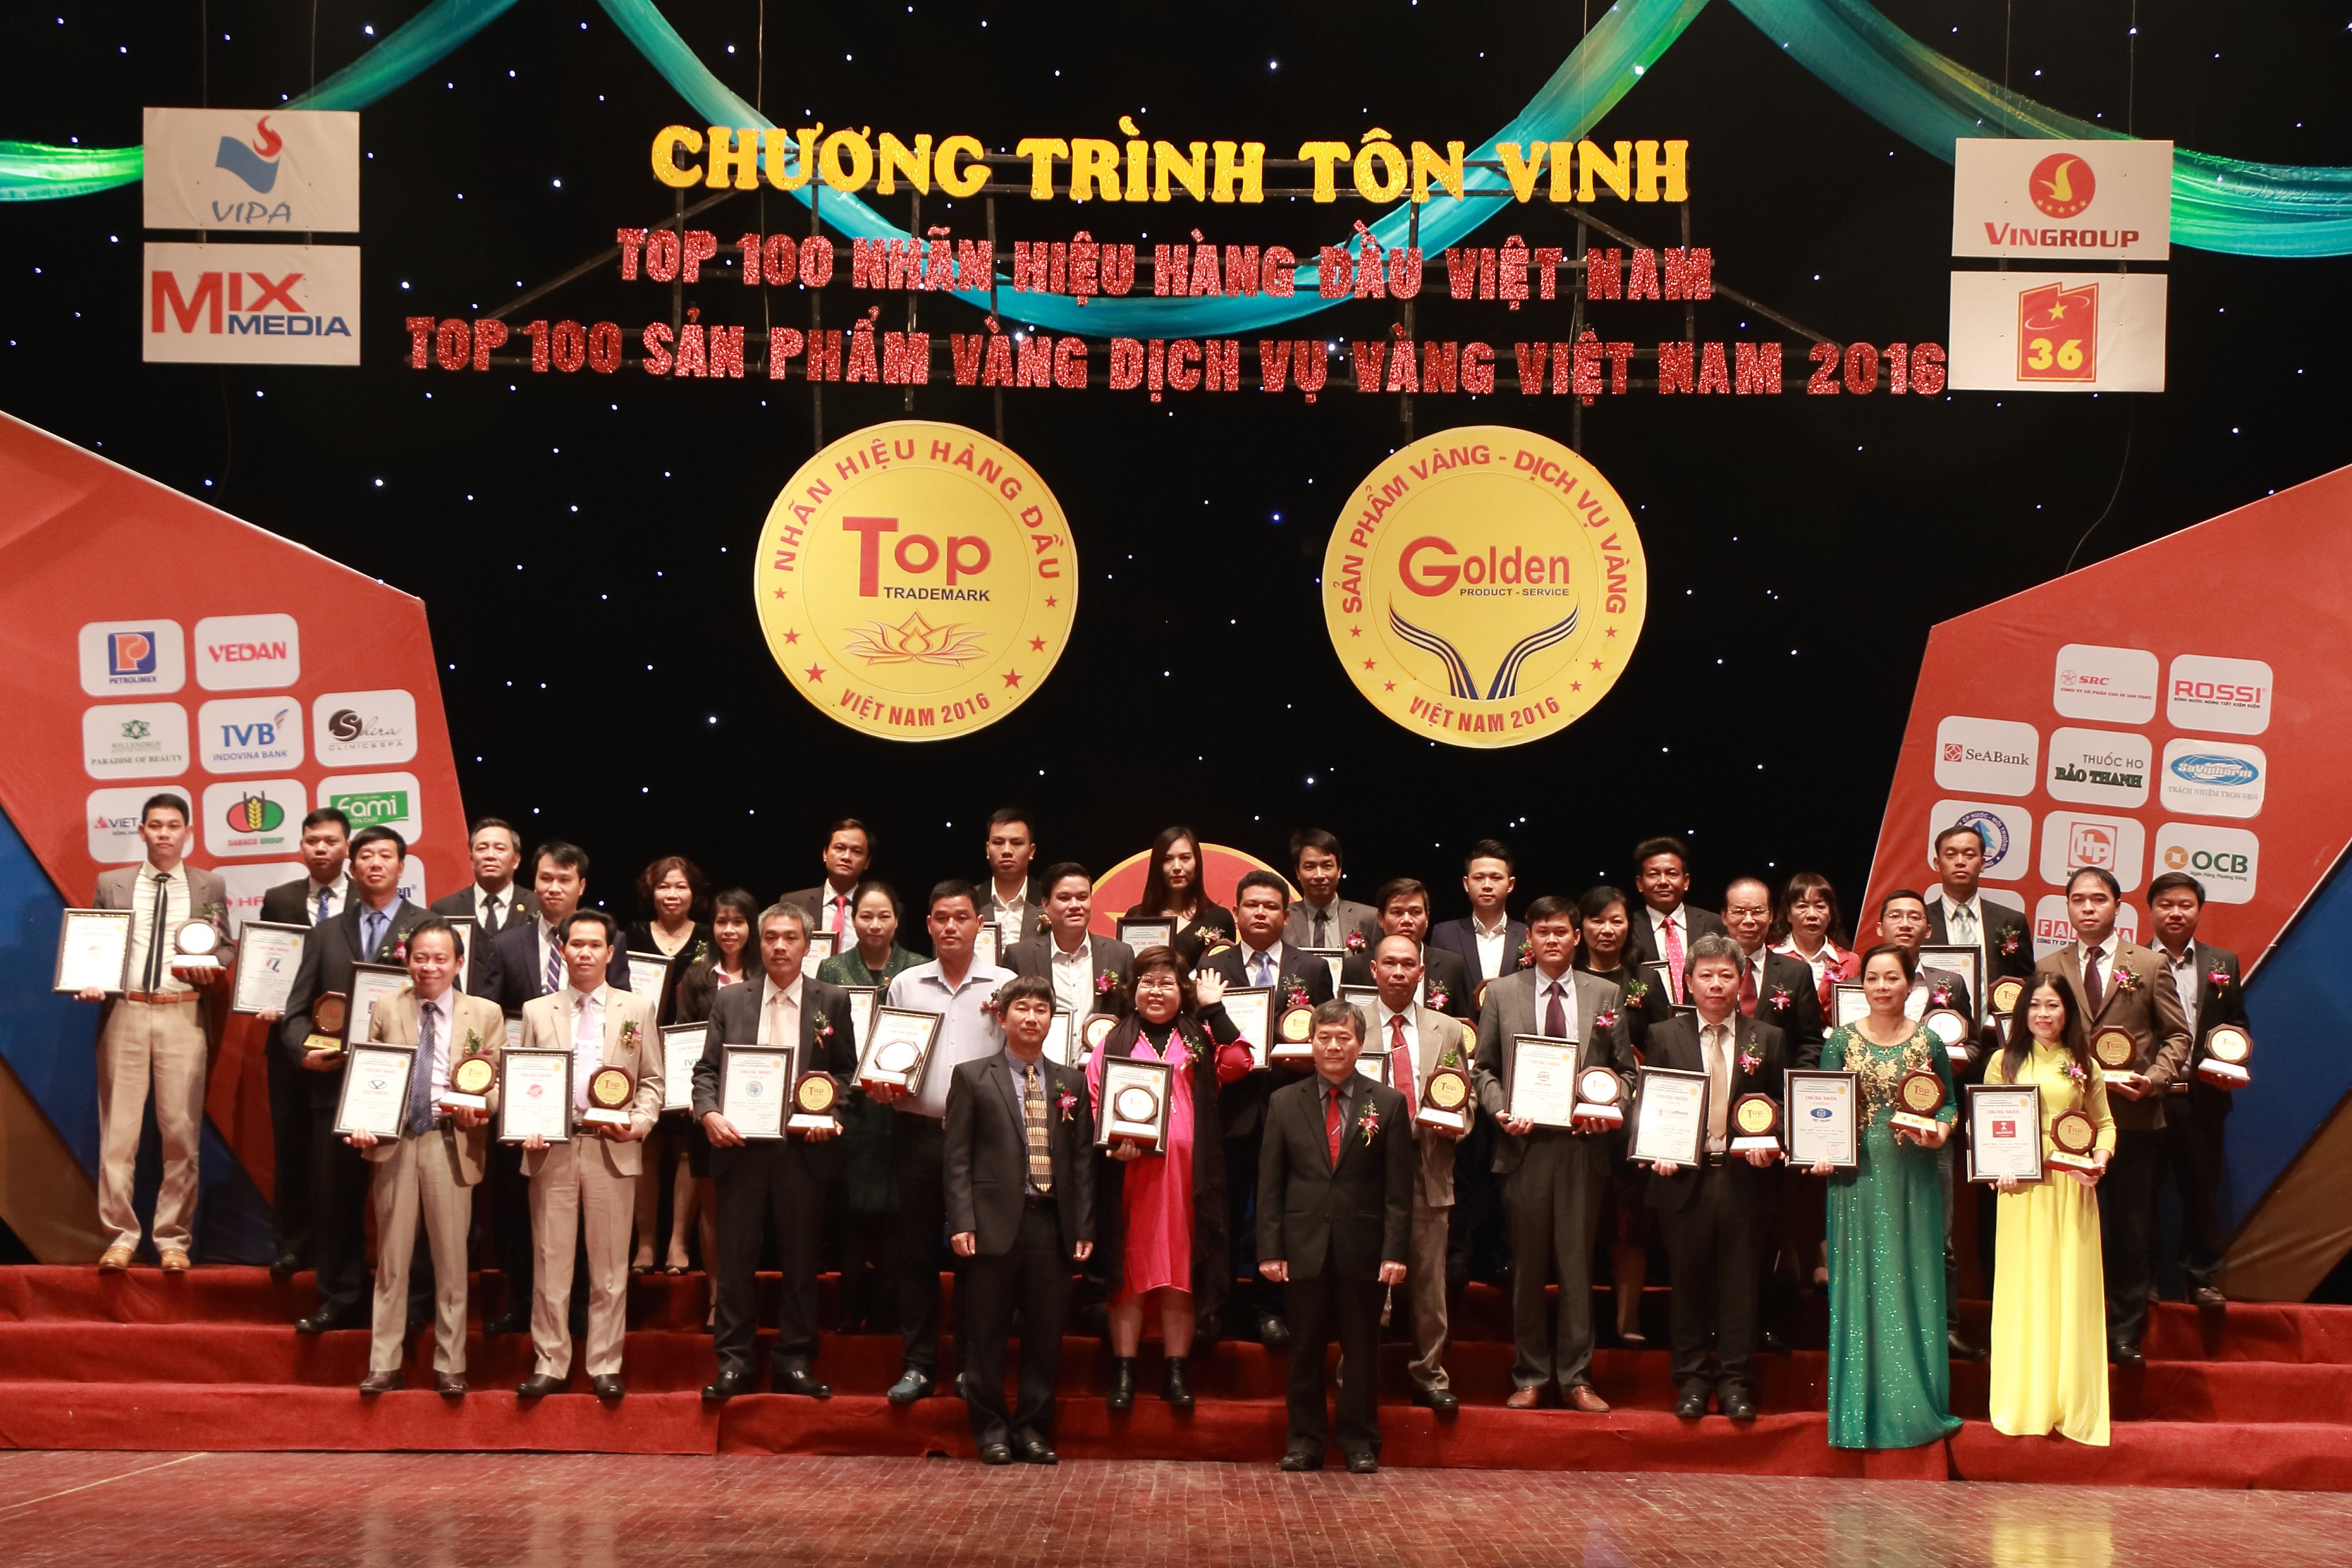 Honored to be in the top 50 gold products and services, top 50 leading brands in Vietnam